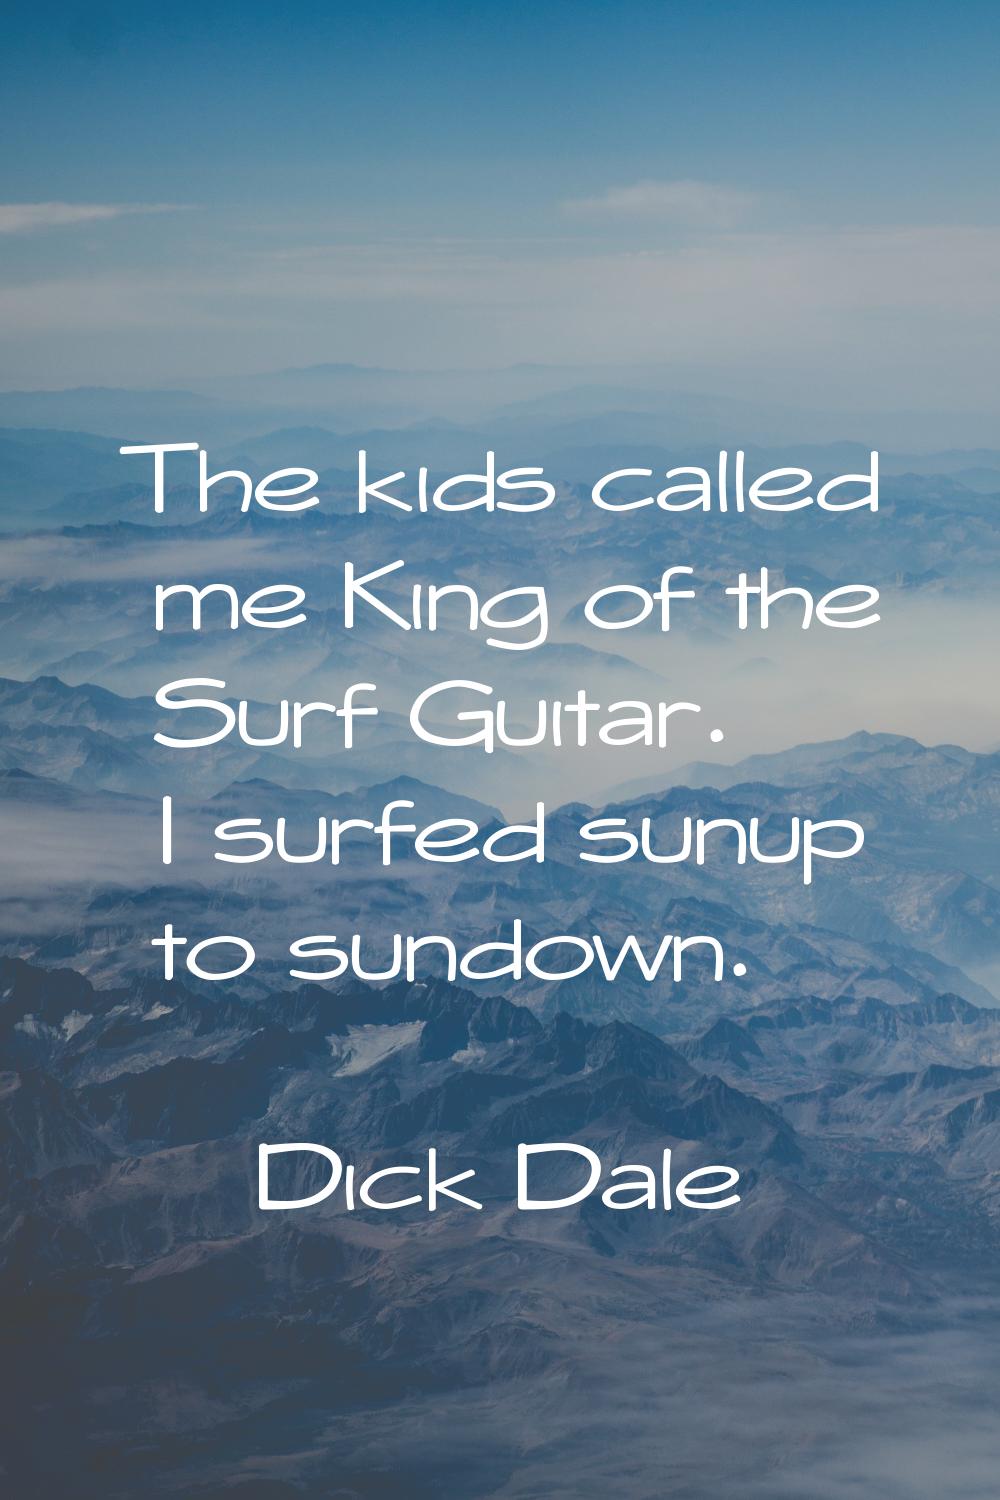 The kids called me King of the Surf Guitar. I surfed sunup to sundown.